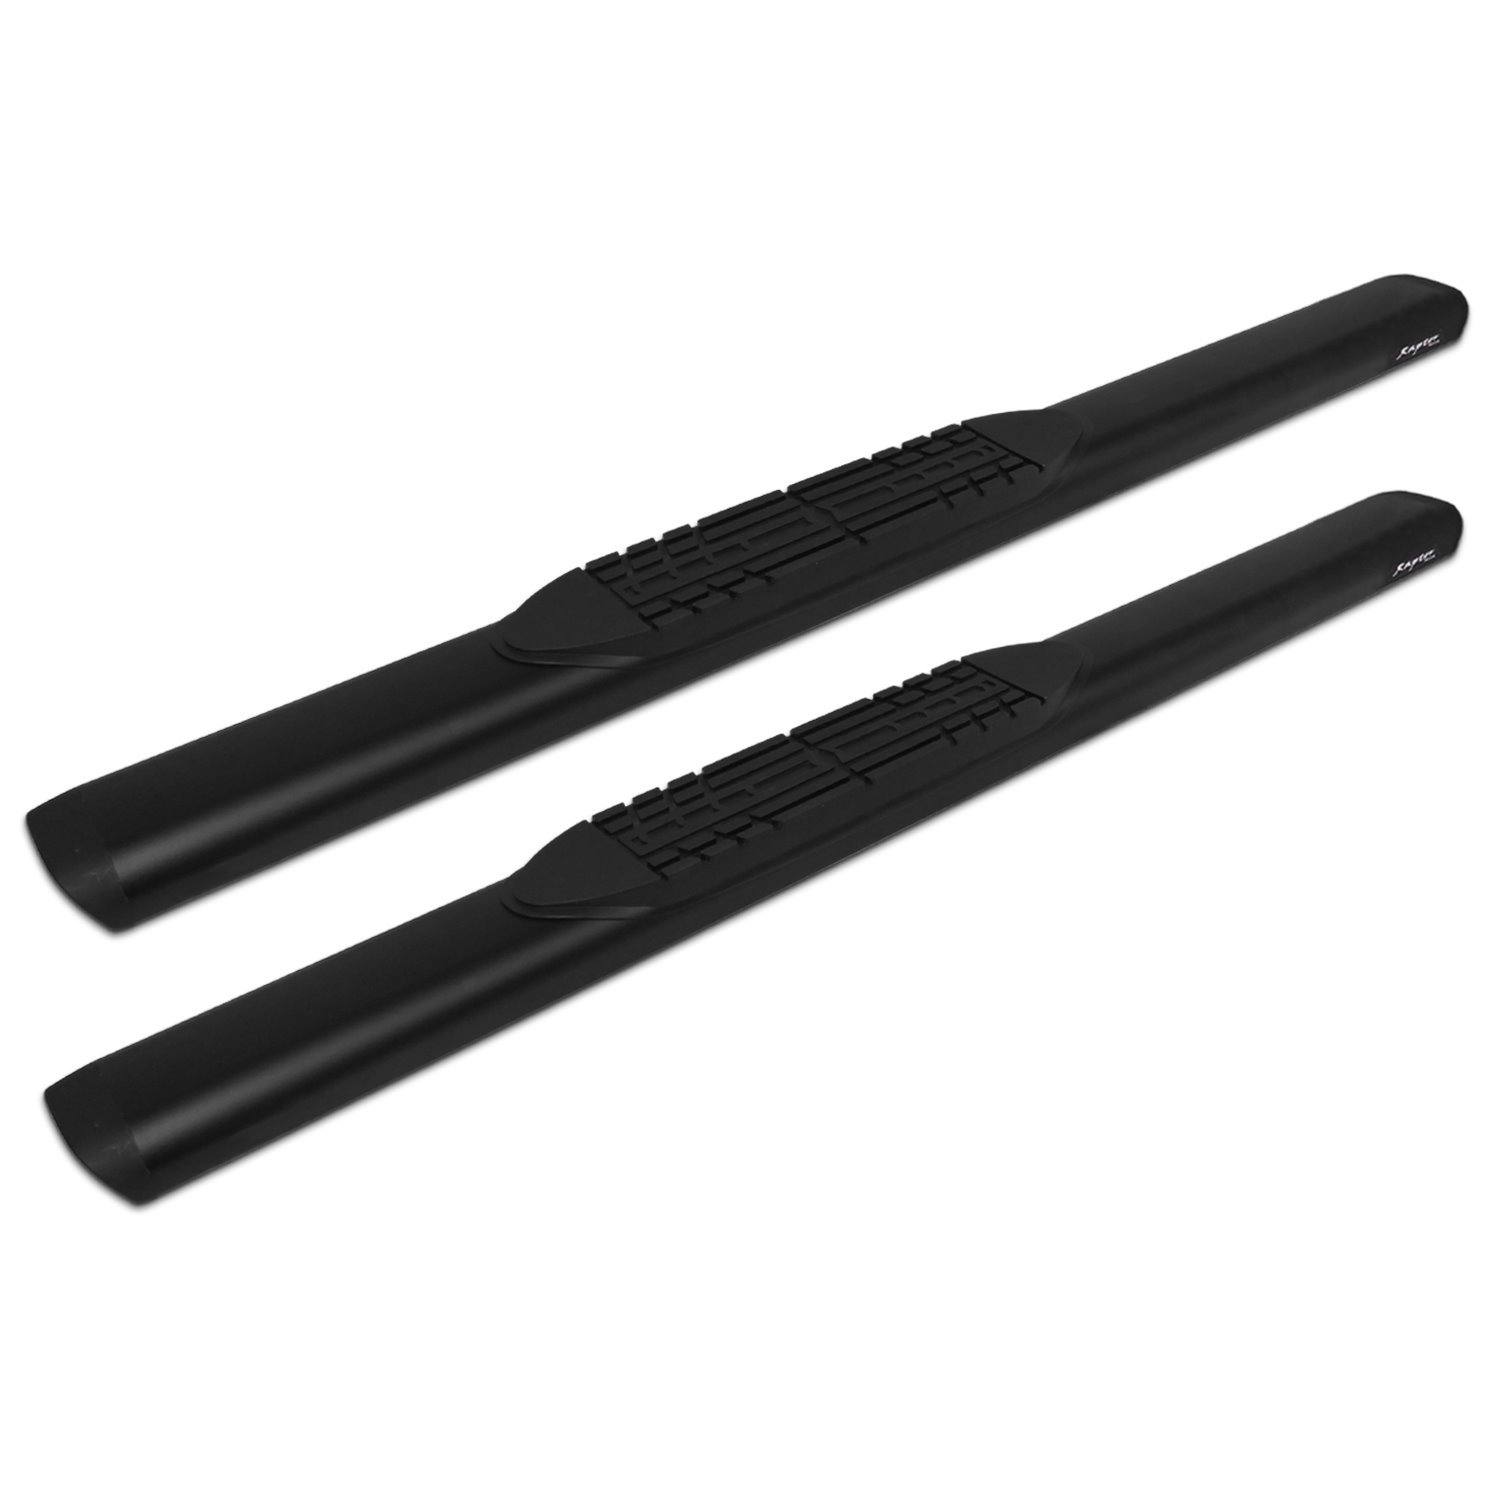 2001-0017BT 5 in Oval Style Slide Track Running Boards, Black Aluminum, Fits Select Chevy Silverado/GMC Sierra 1500/2500/3500